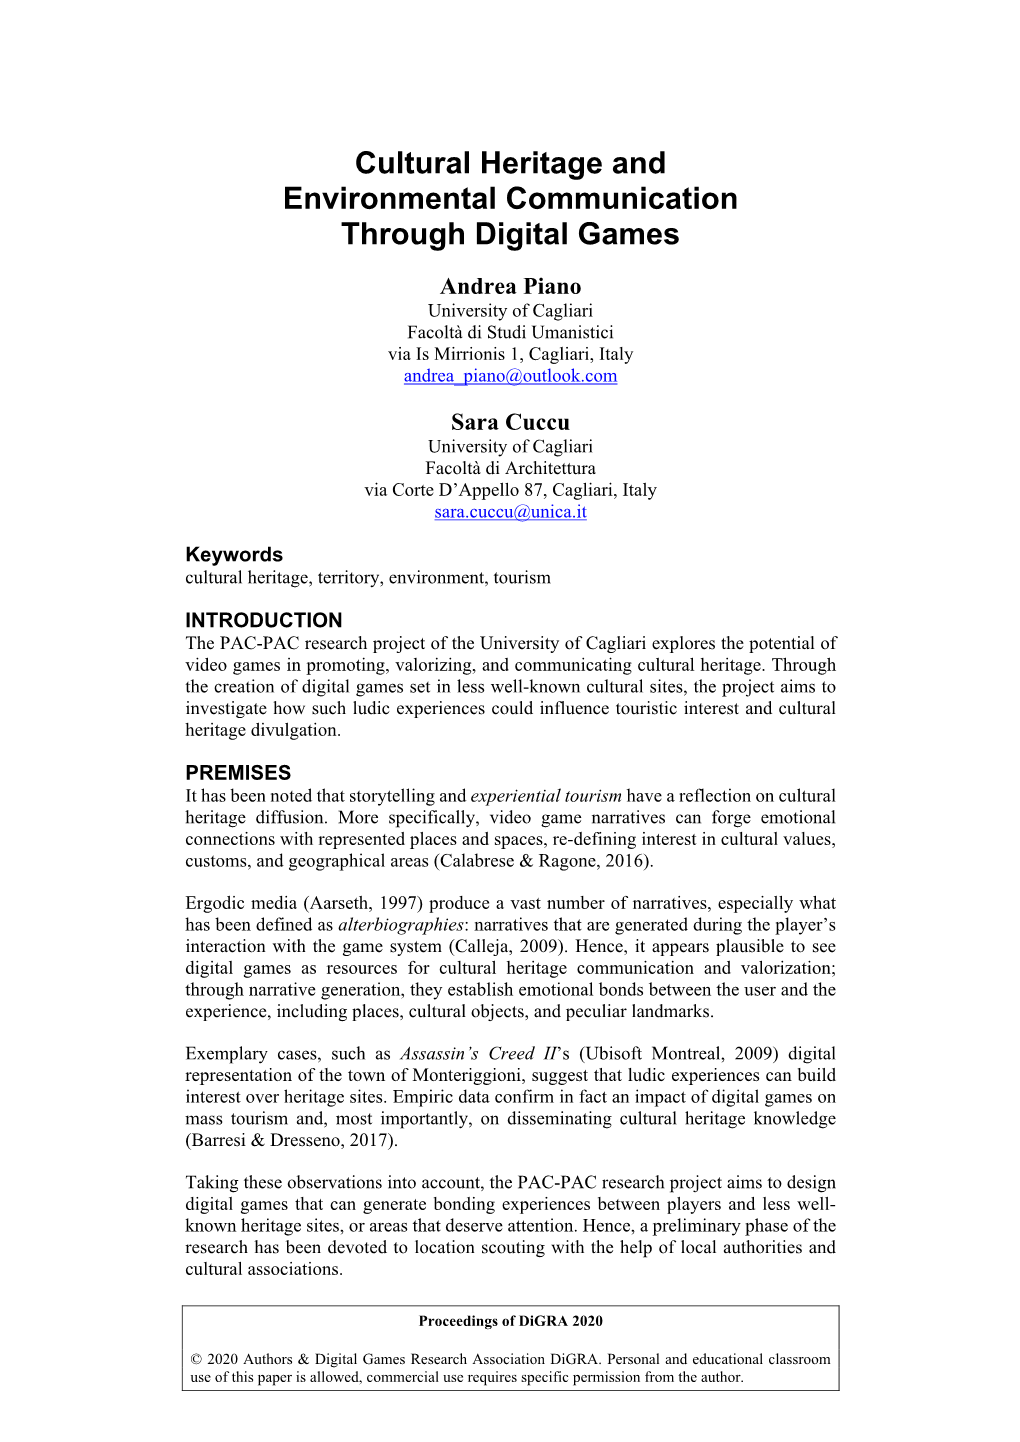 Cultural Heritage and Environmental Communication Through Digital Games